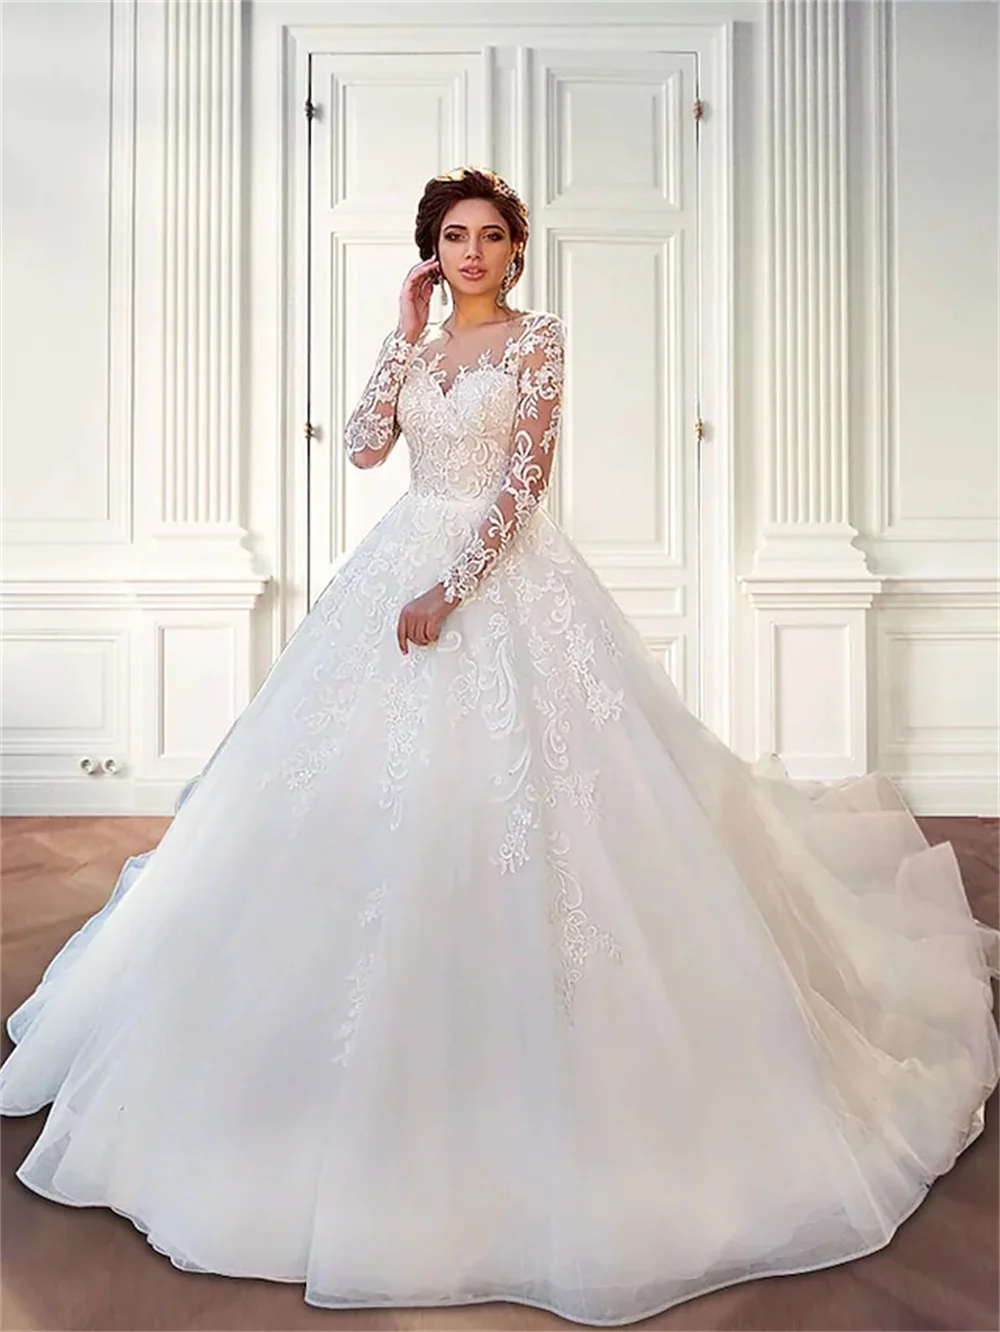 

Za Fashion Luxury Gowns Formal Ball Wedding Dresses Jewel Neck Court Train Lace Tulle Long Sleeve Plus Size Illusion Sleev